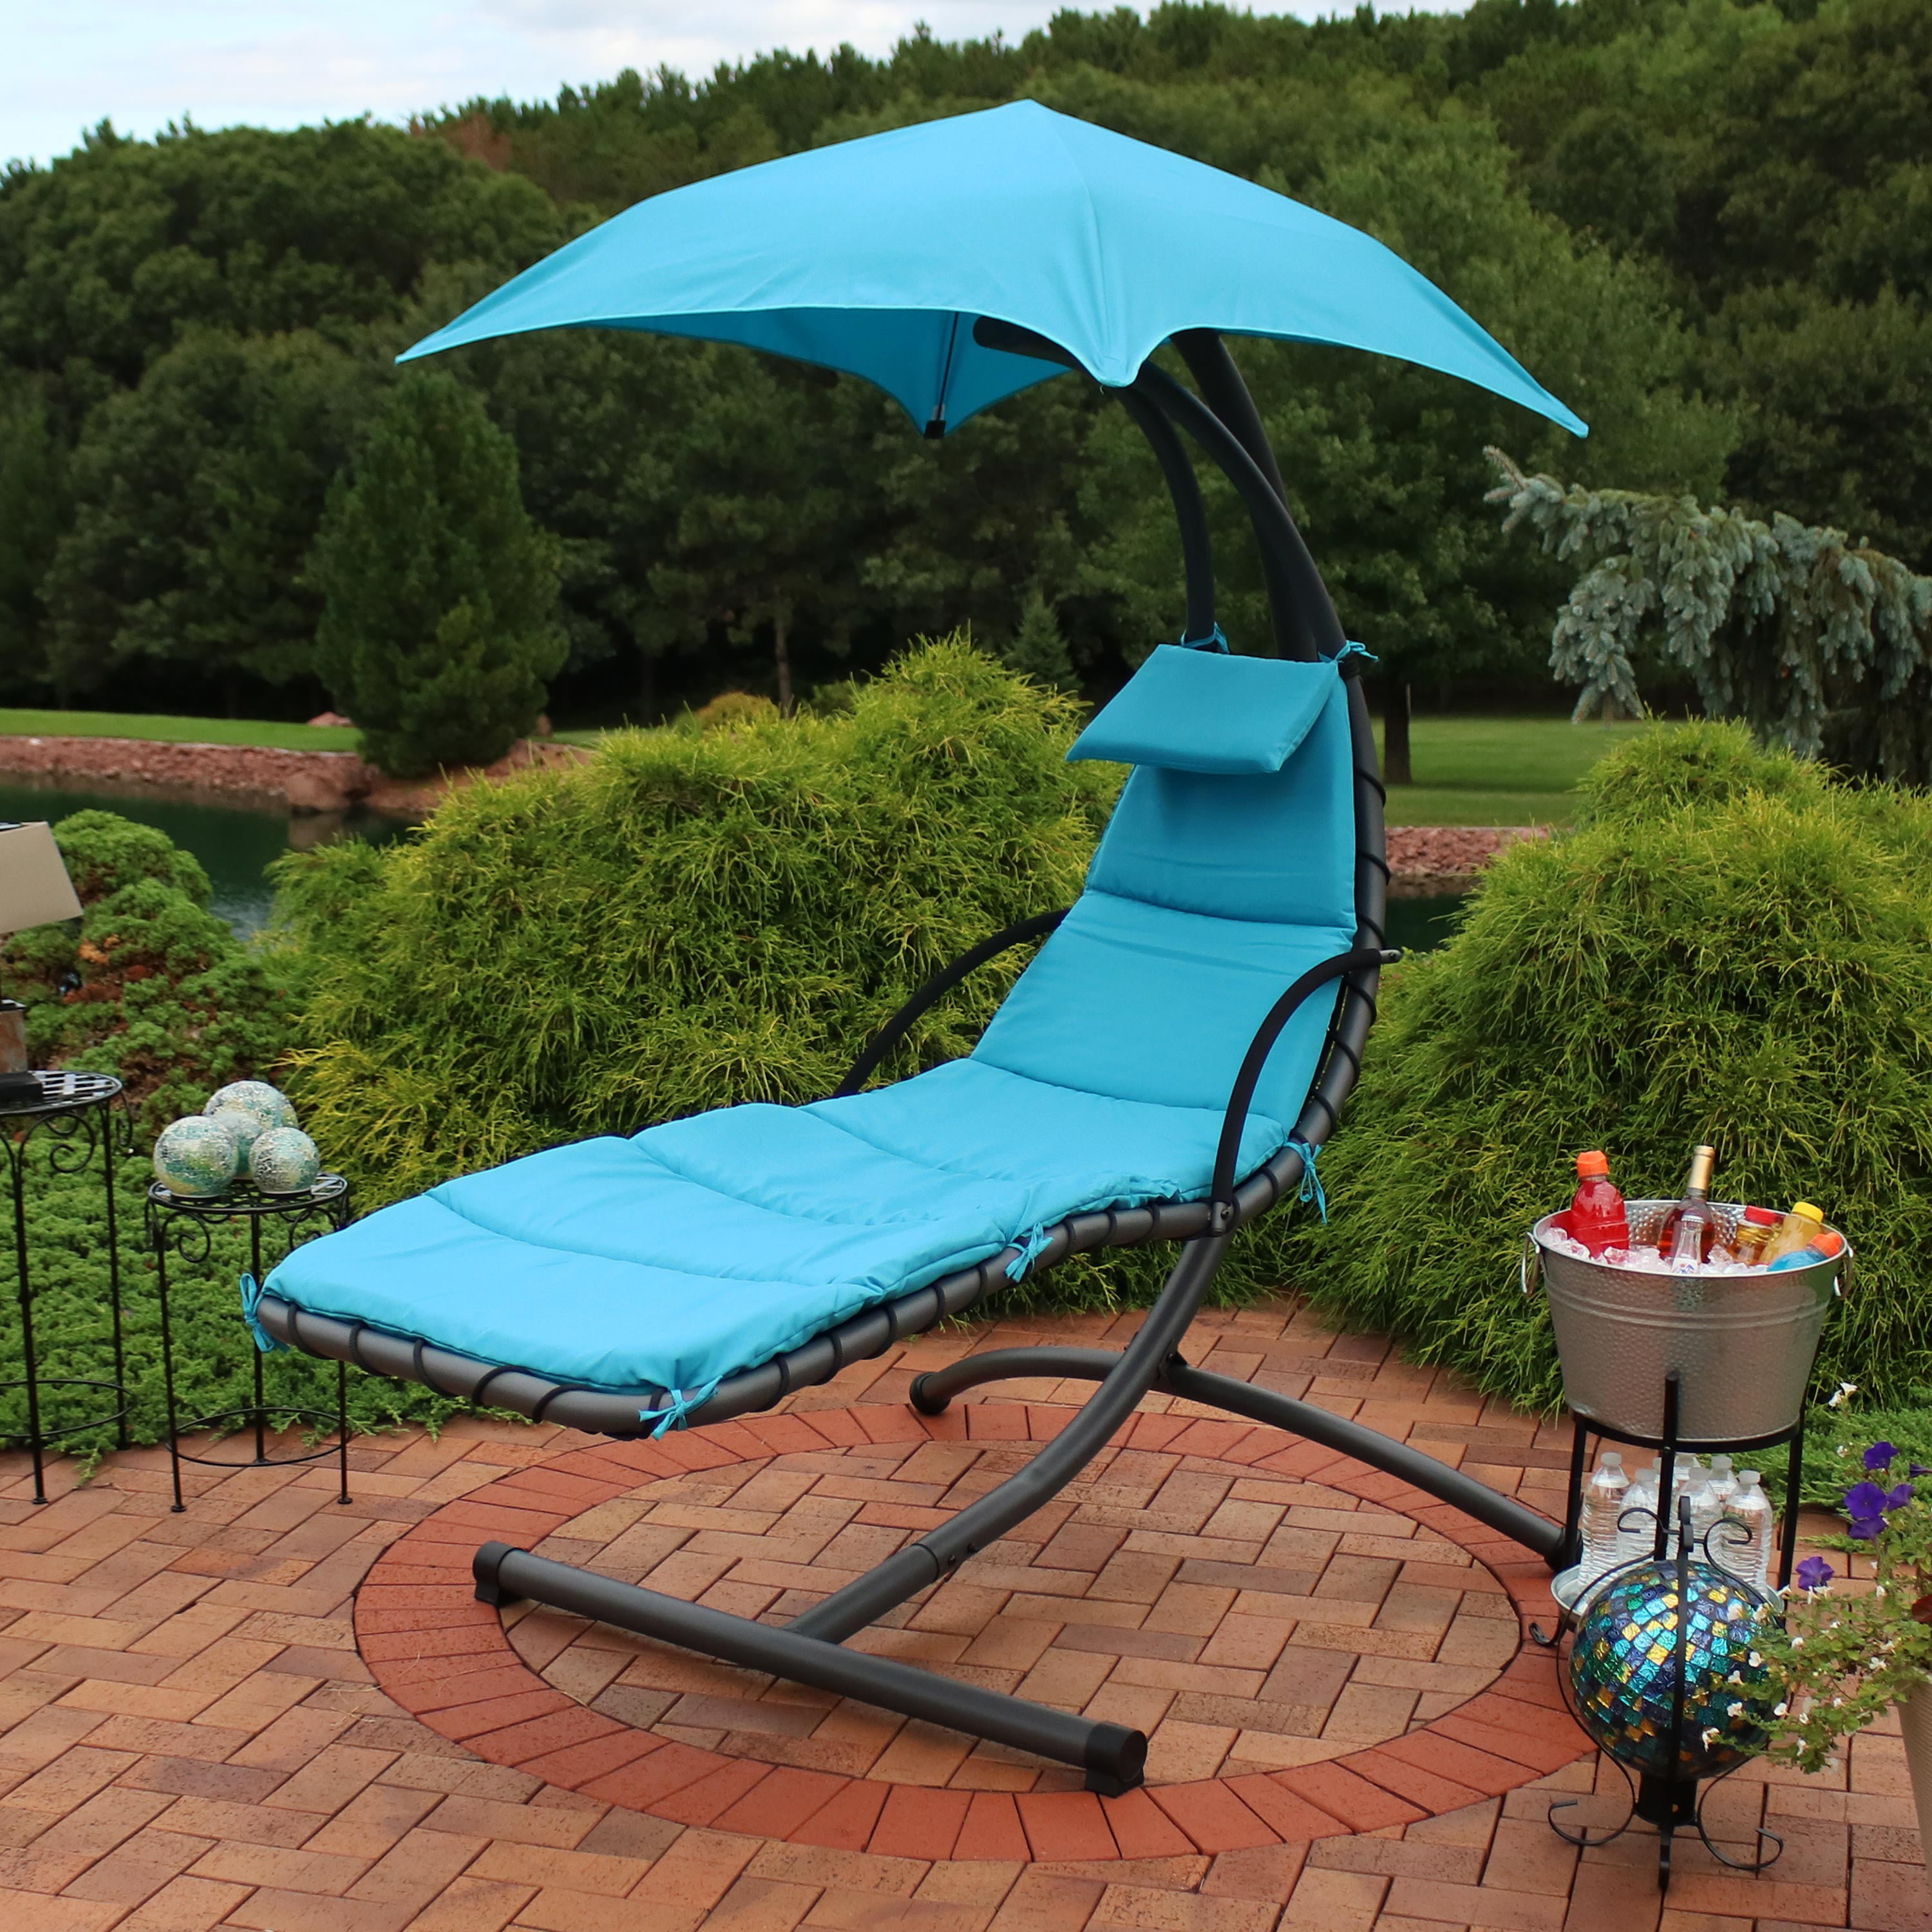 Sunnydaze Floating Patio Chaise Lounger Chair With Canopy Teal 79